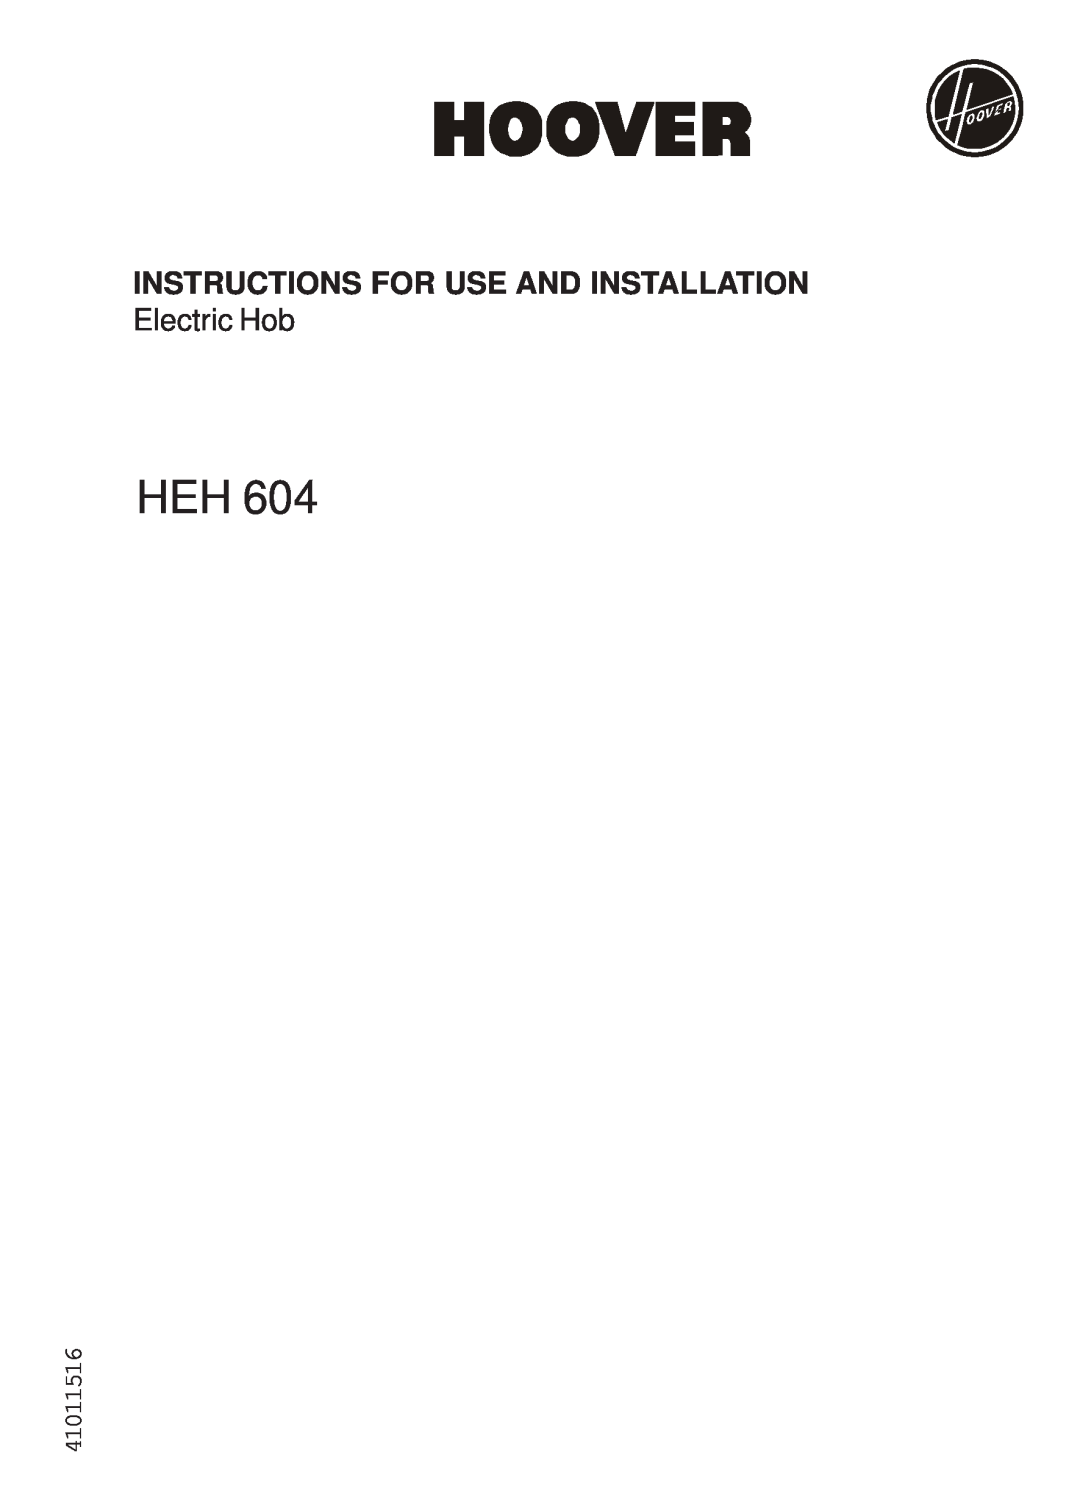 Hoover HEH 604 manual Instructions For Use And Installation, Electric Hob, 41011516 